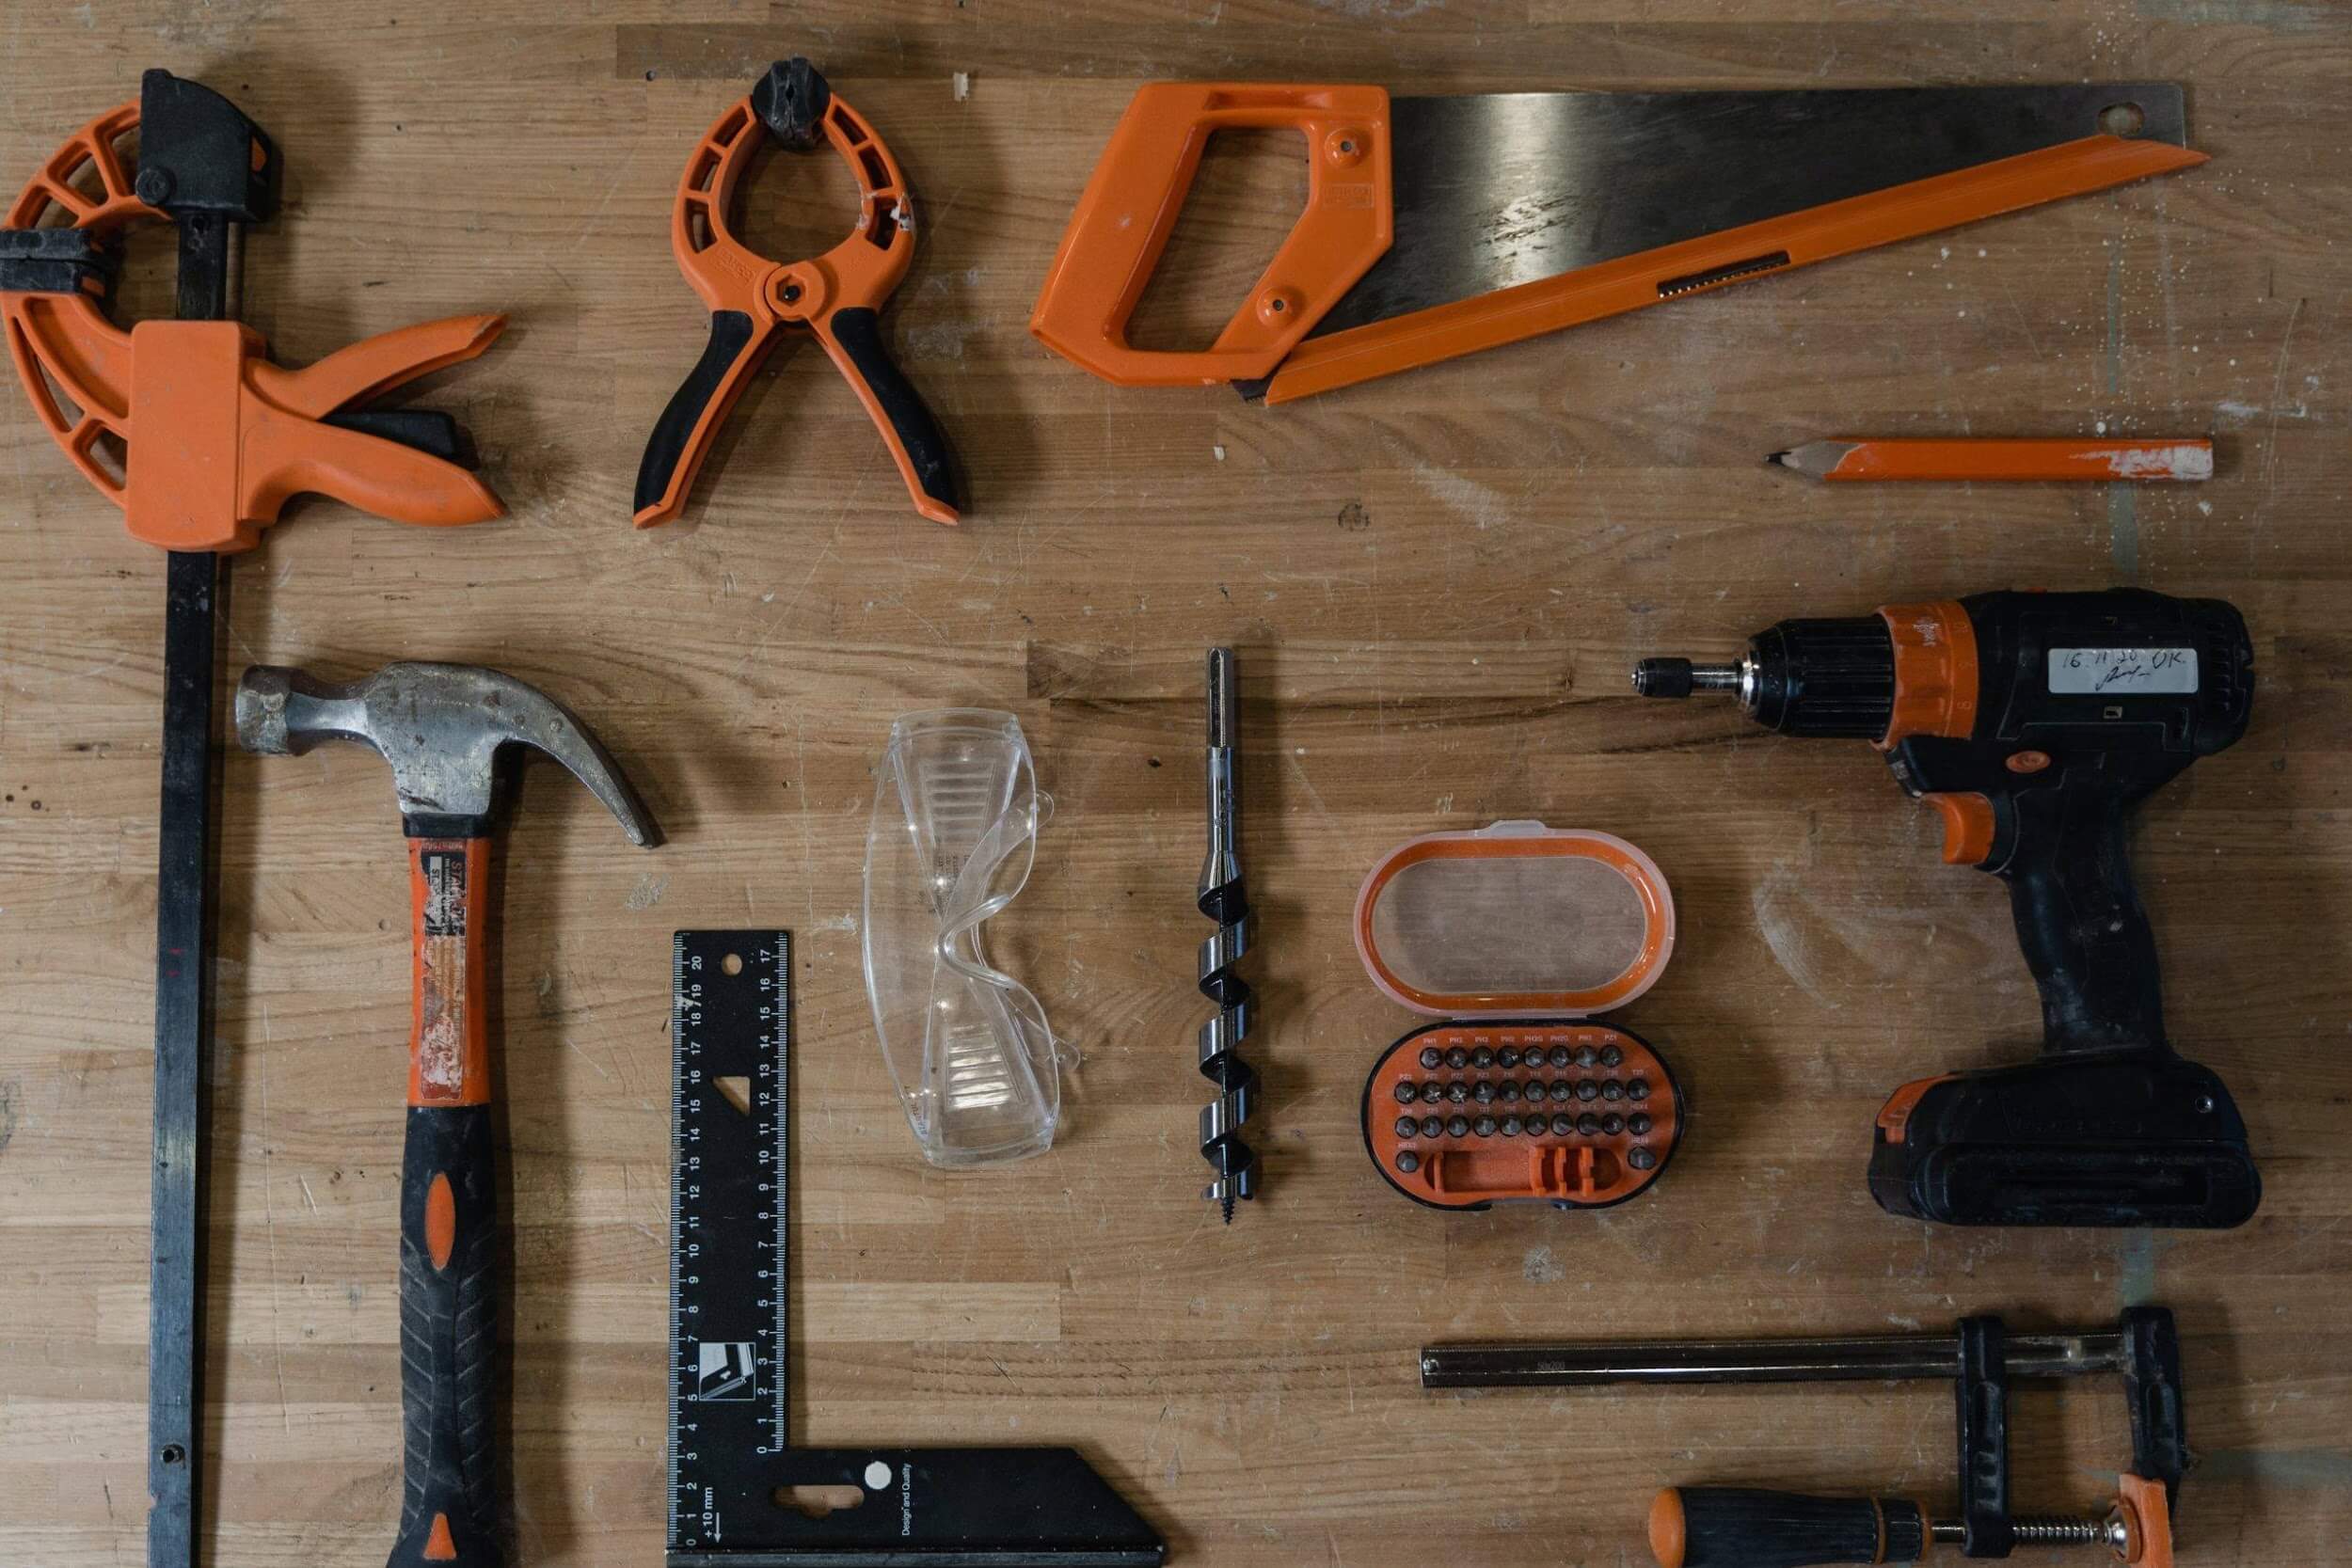 layout of tools on wooden worktable